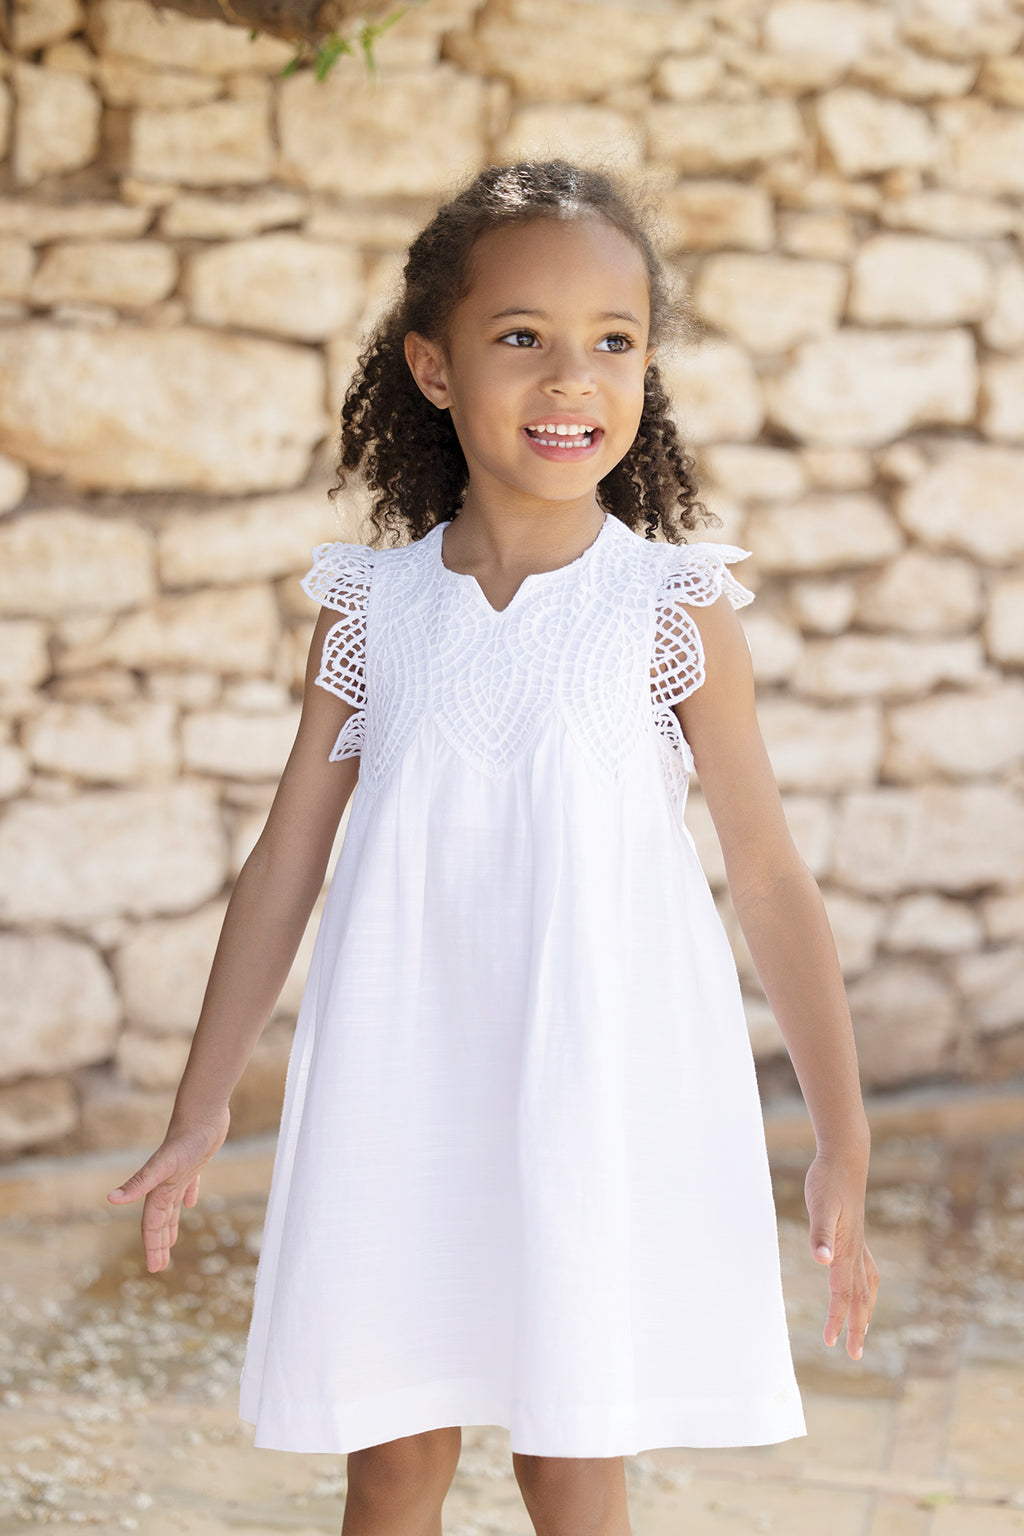 Dress - White Embrodery cotton